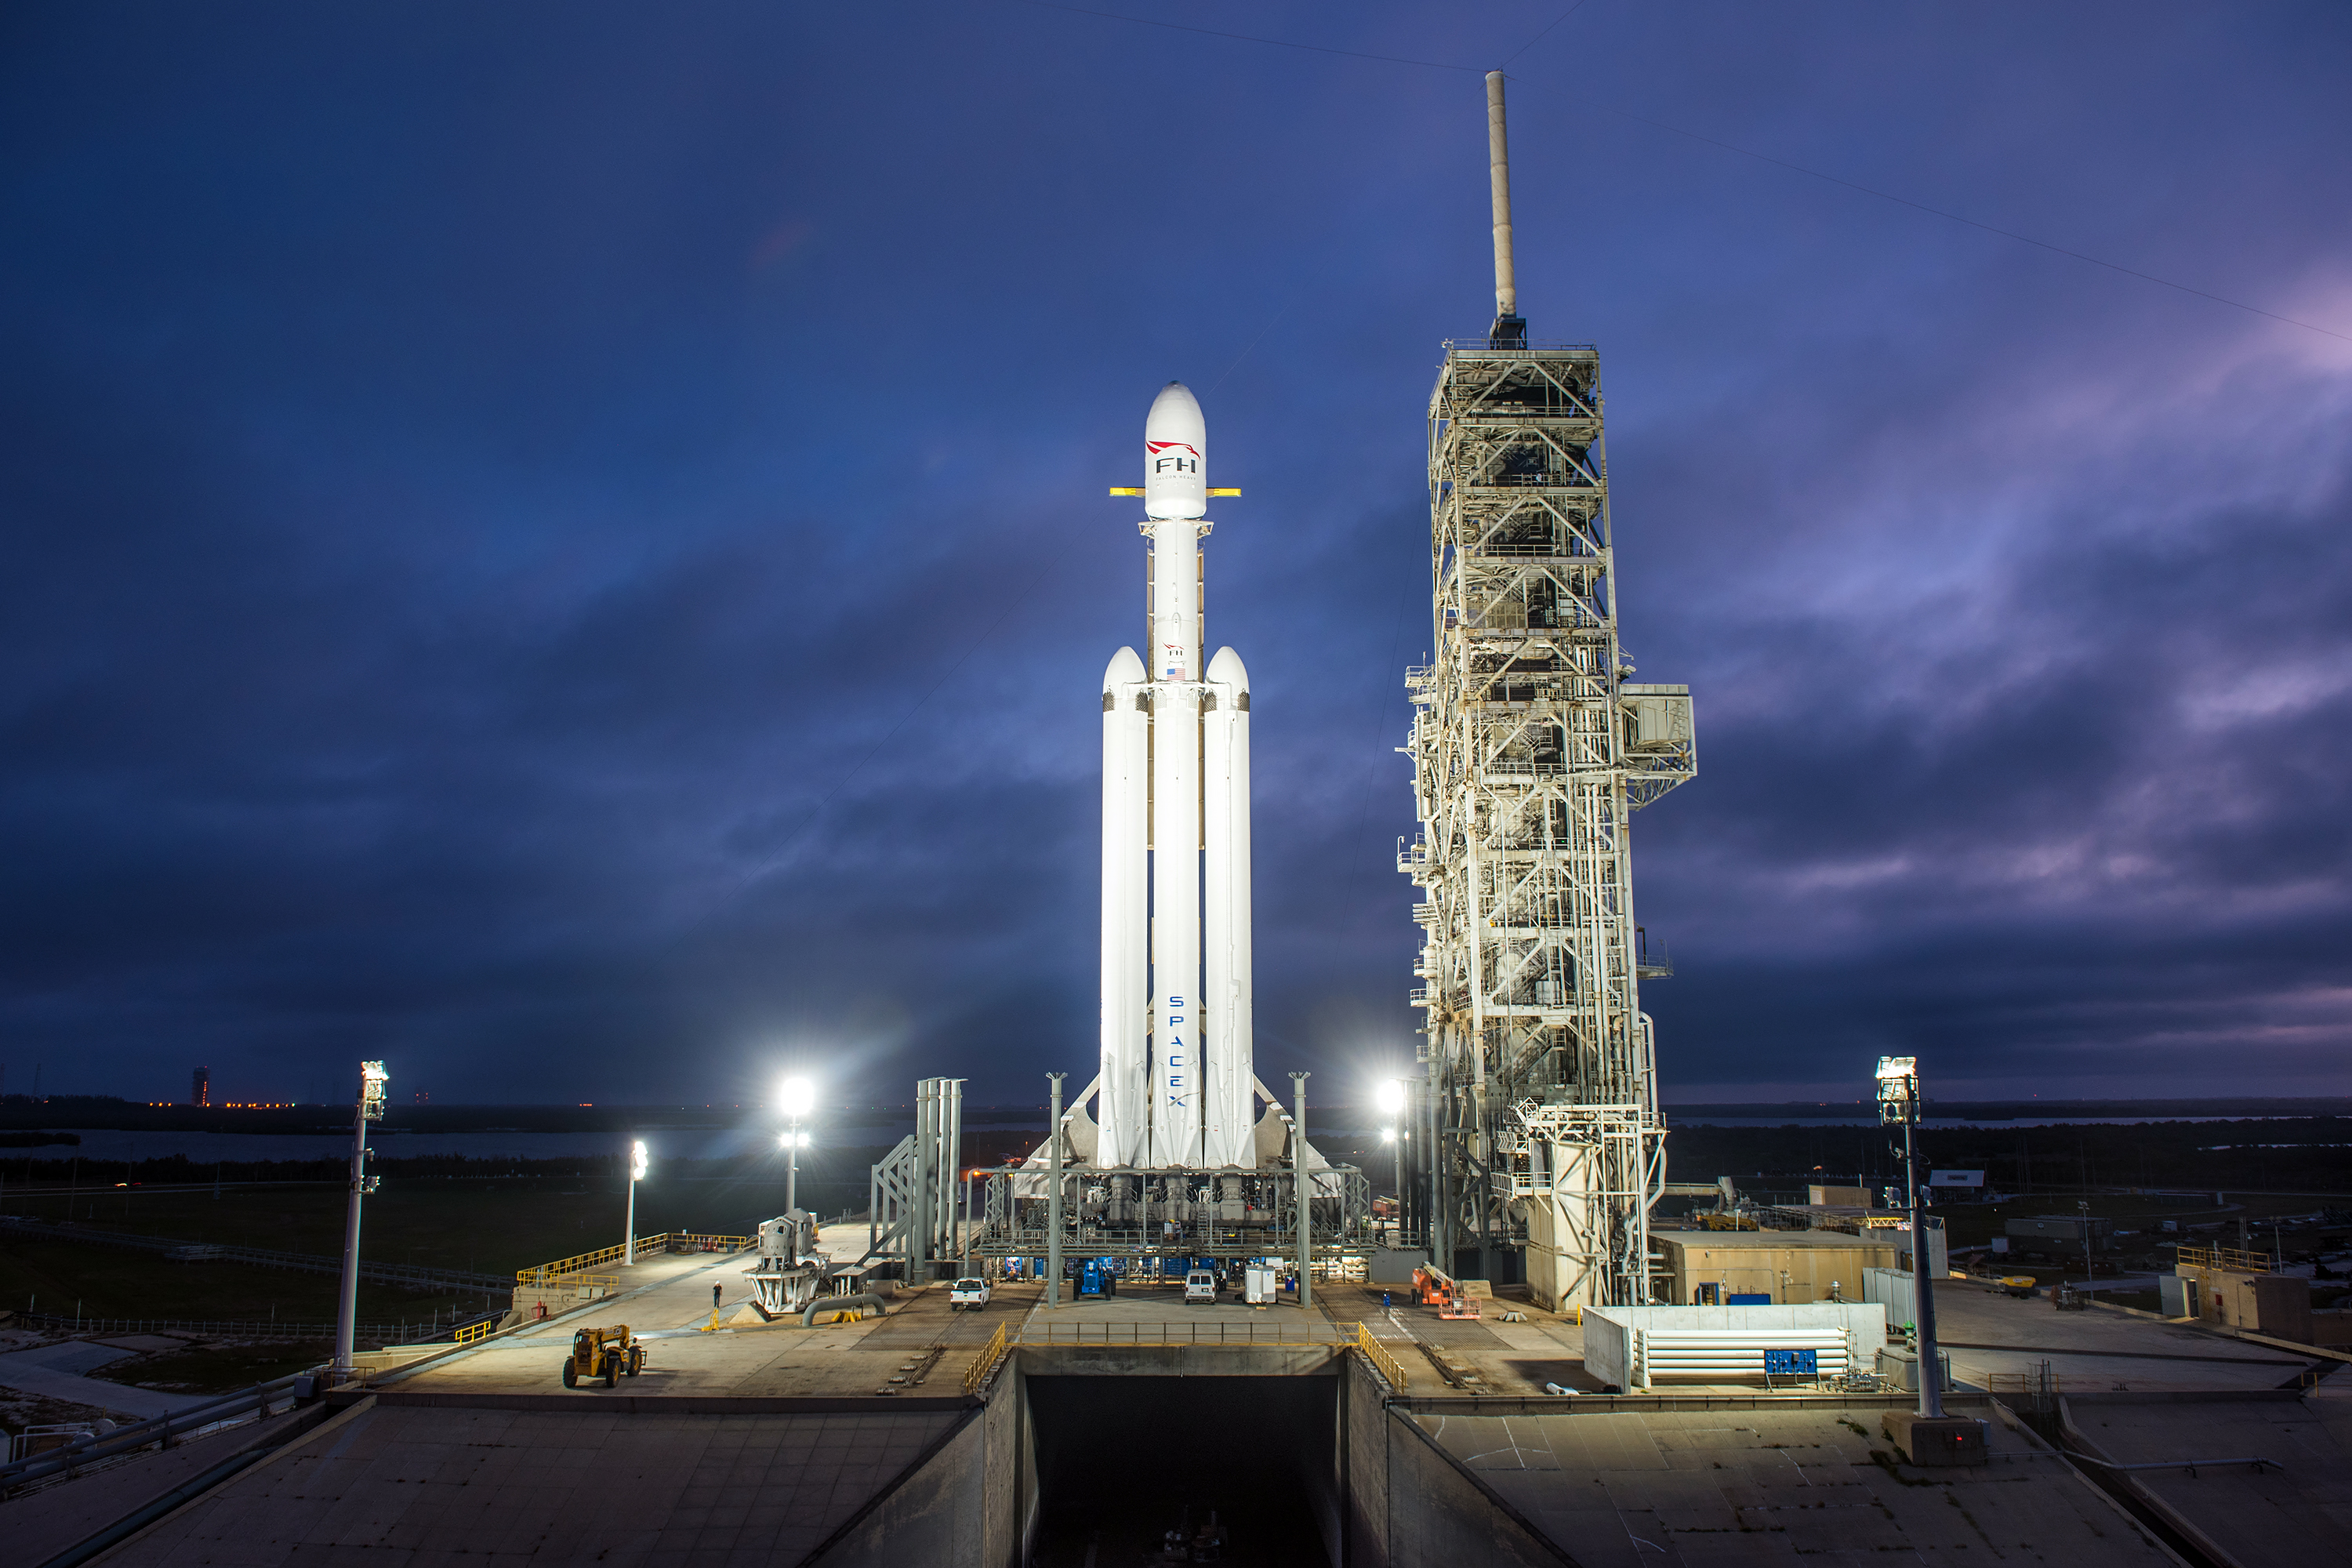 Big bird, big promises: The Falcon Heavy must live up to a lot of hype (SpaceX)